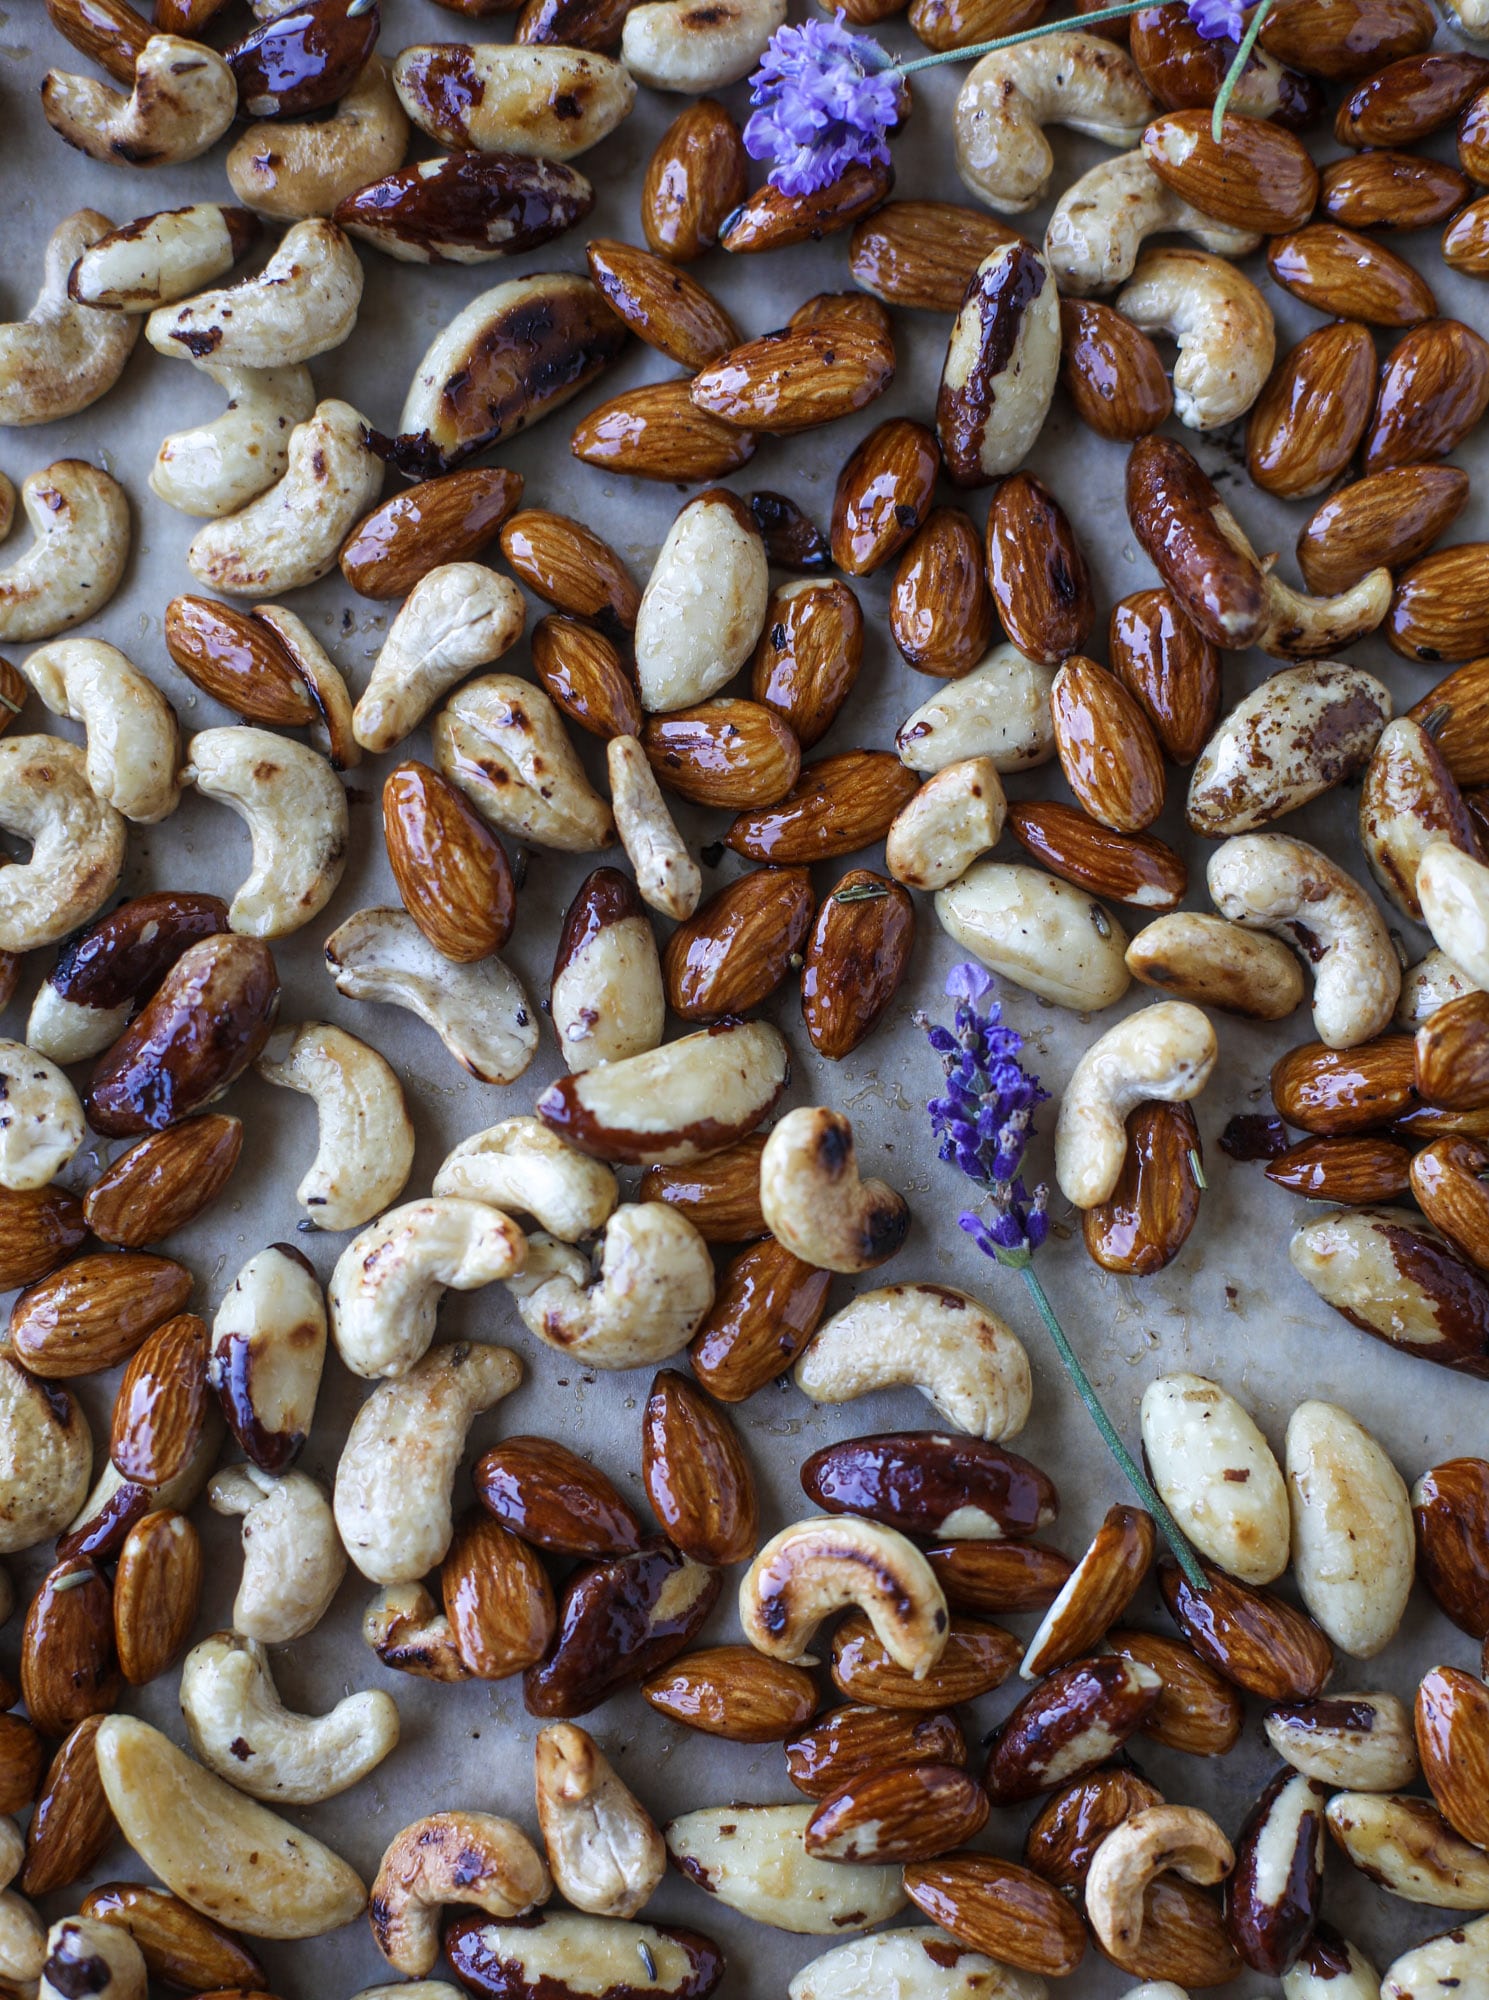 These salted honey lavender nuts are the best snack to make for when you're on the go or when you need a perfect appetizer for your dinner party. Roasted, sweet and salty with a hint of lavender makes these irresistible! I howsweeteats.com #honey #lavender #nuts #salted #almonds #cashews #snacks #appetizers